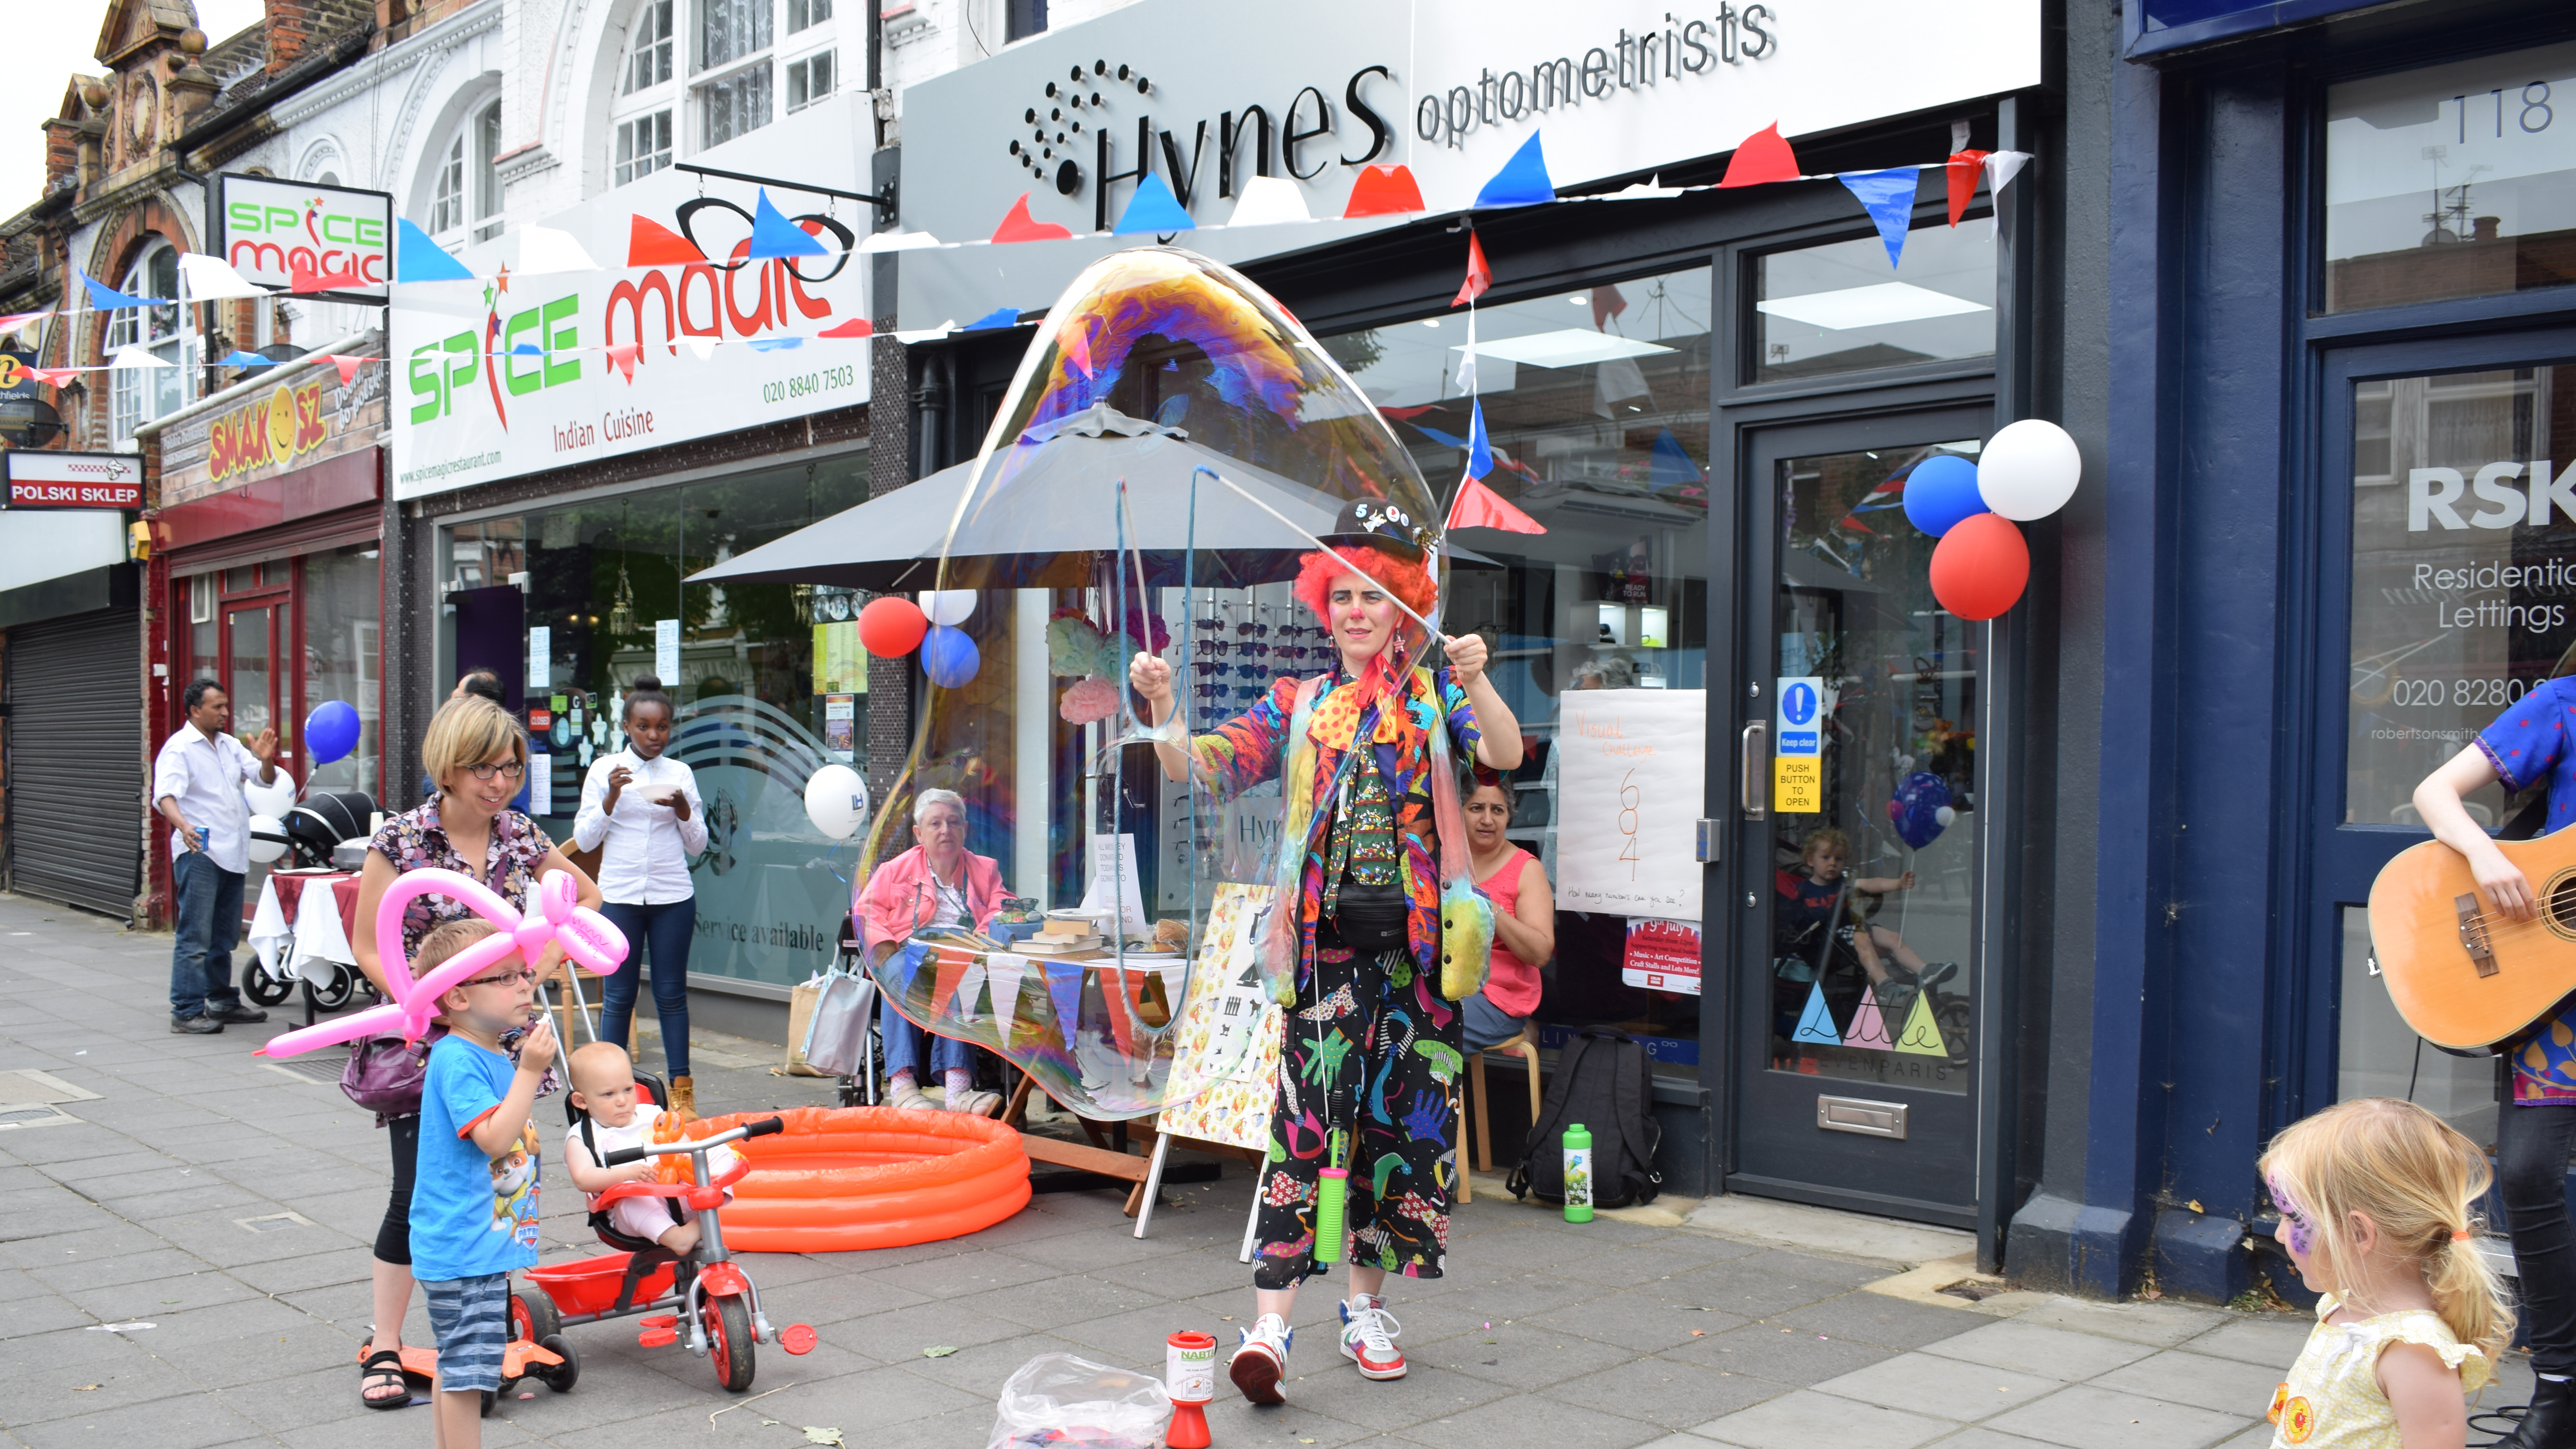 Street event outside Hynes Optometrists with bunting and balloons decorating the practice. A woman and two children are passing by, one child is wearing a balloon hat and the other is in a push chair. In the centre a person dressed as a clown creating large bubbles with two sticks. Behind the clown two women are sitting at either end of a table. On the bottom right a little girl with her face painted and a person playing a guitar.